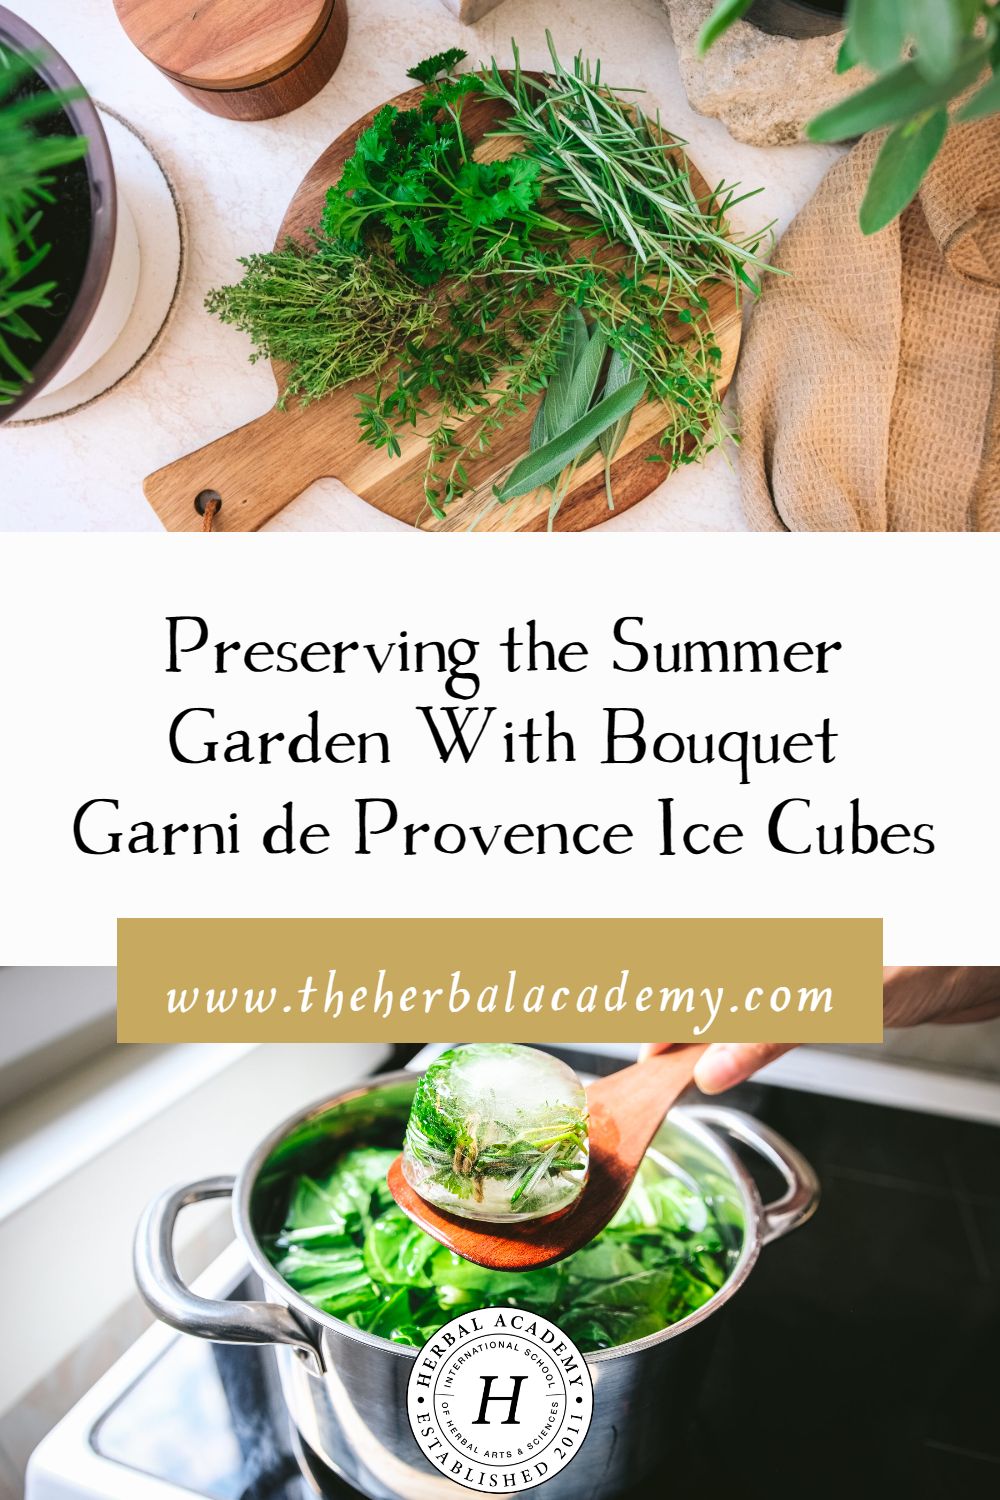 Preserving the Summer Garden With Bouquet Garni de Provence Ice Cubes | Herbal Academy | The herbs in an aromatic bundle of a bouquet garni are one way to enhance the flavors of dishes, infusing them with the essence of the herbs.